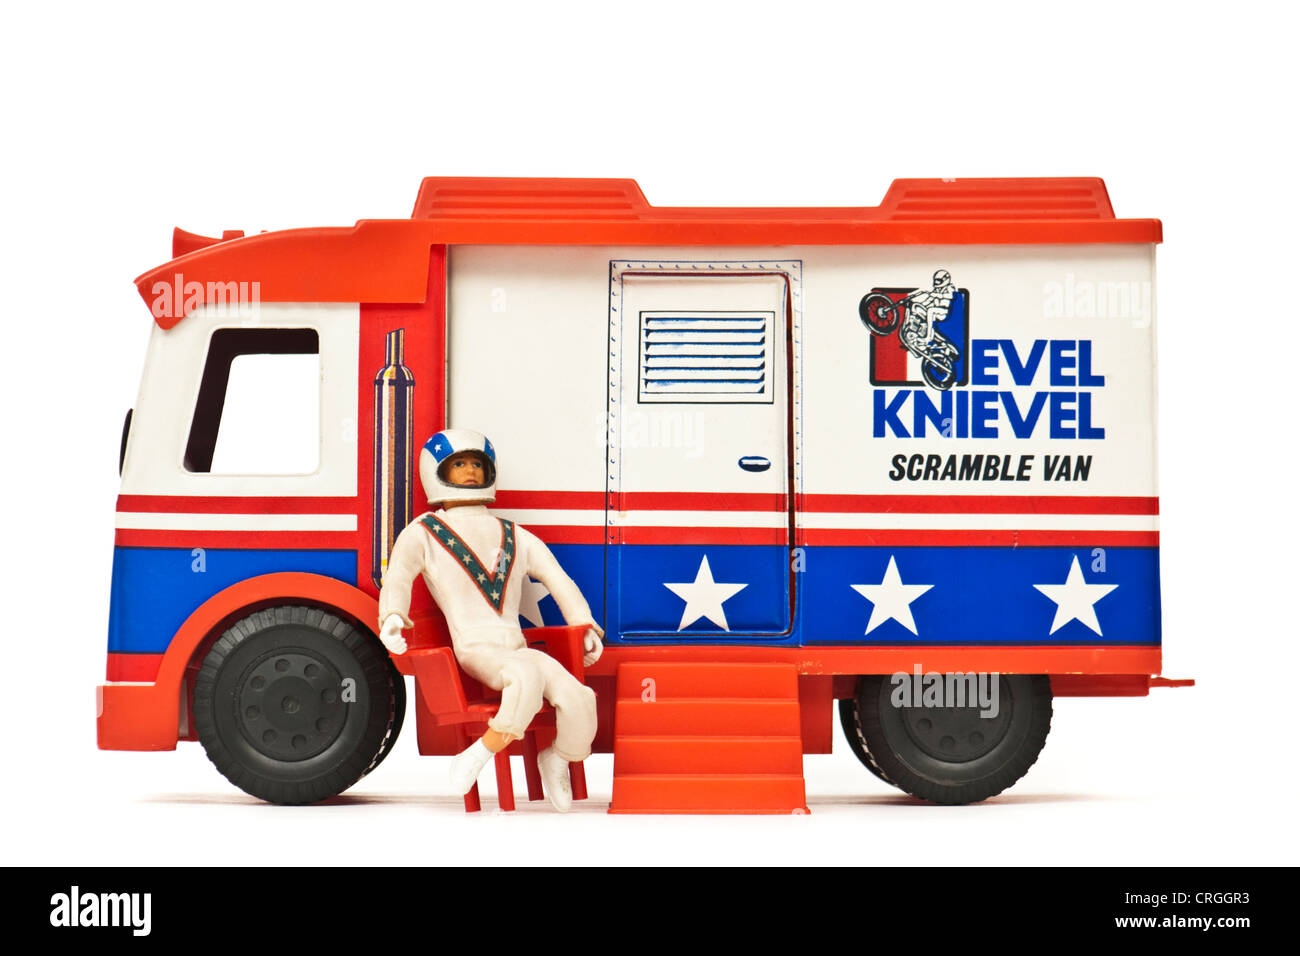 1973 Evel Knievel 'Scramble Van' toy by Ideal Stock Photo